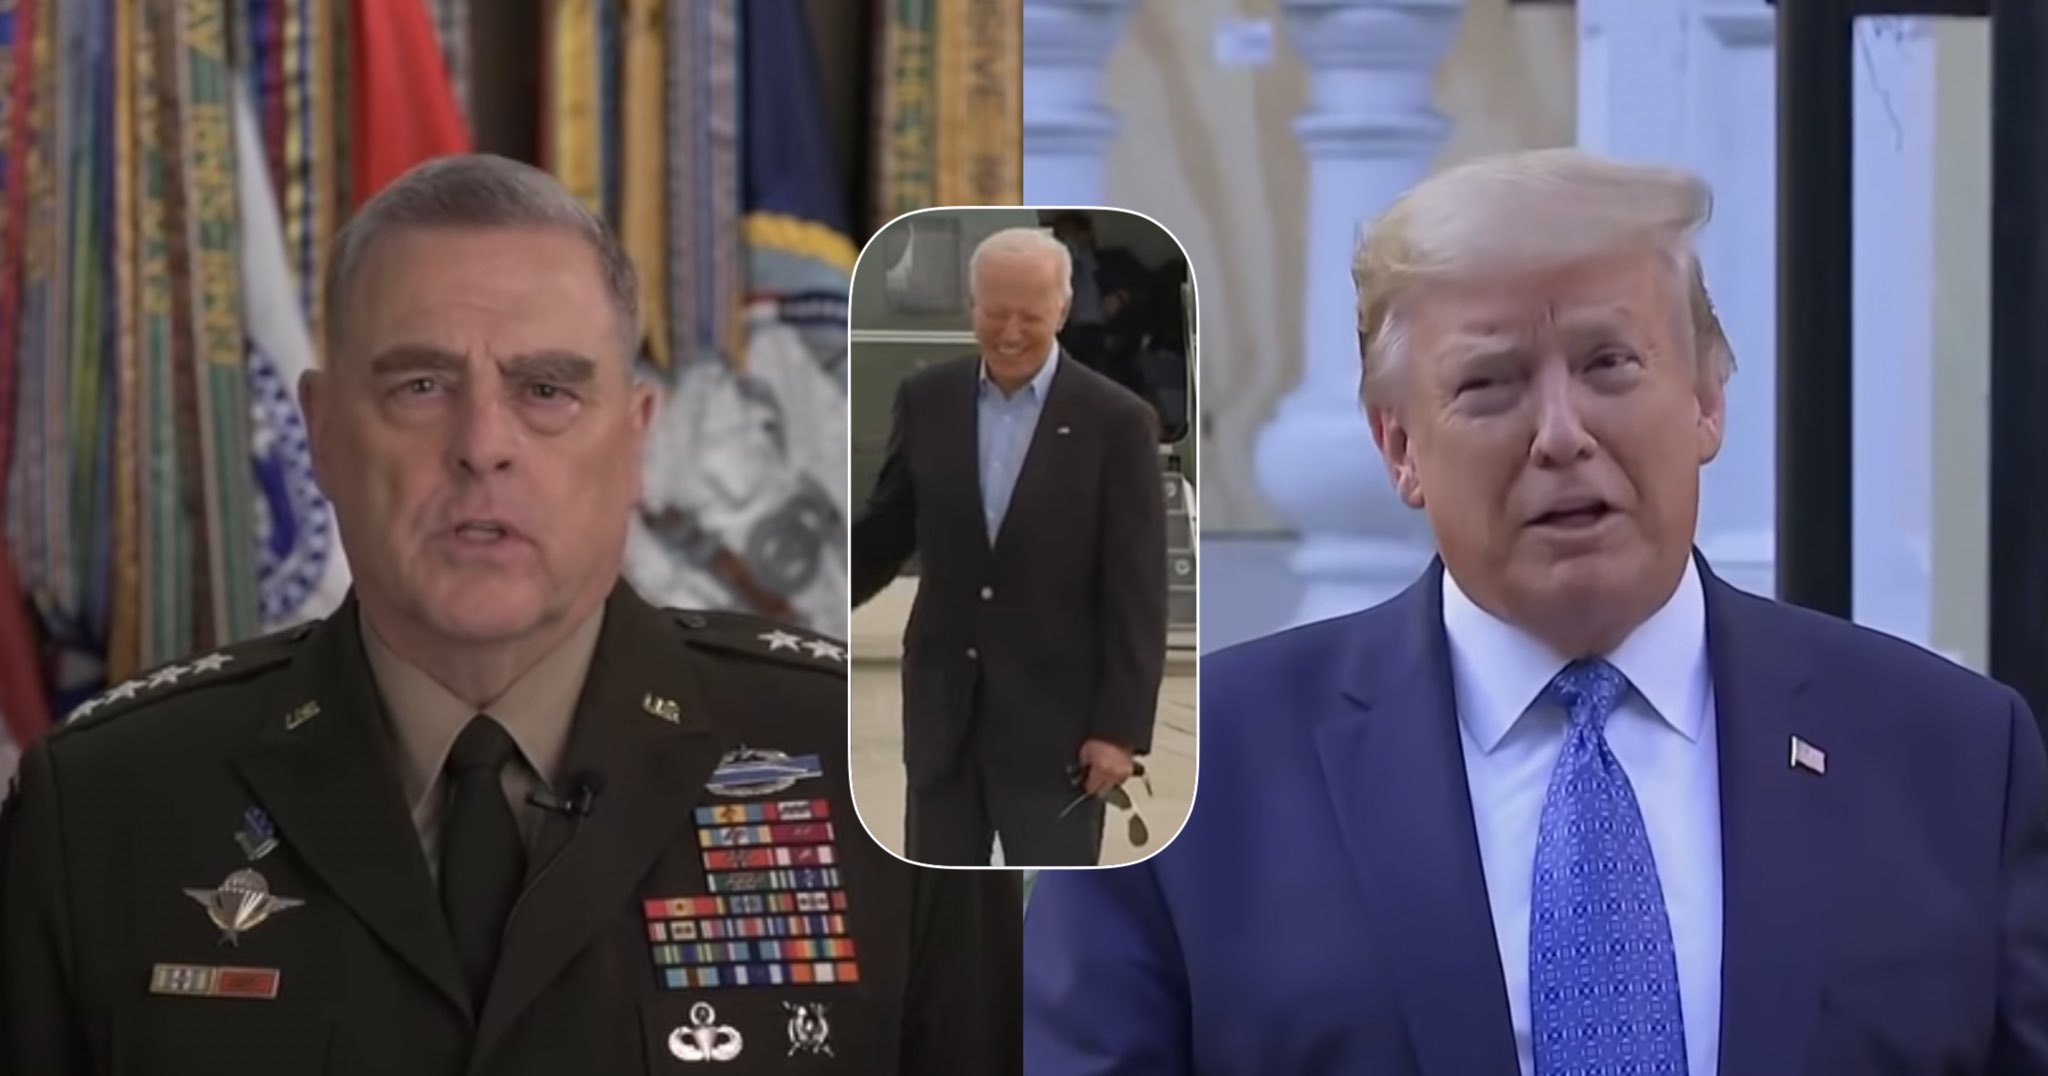 Then-President Trump Wanted Military to Strongly Handle BLM Protesters But General Milley Reportedly Stopped Him - Media Right News